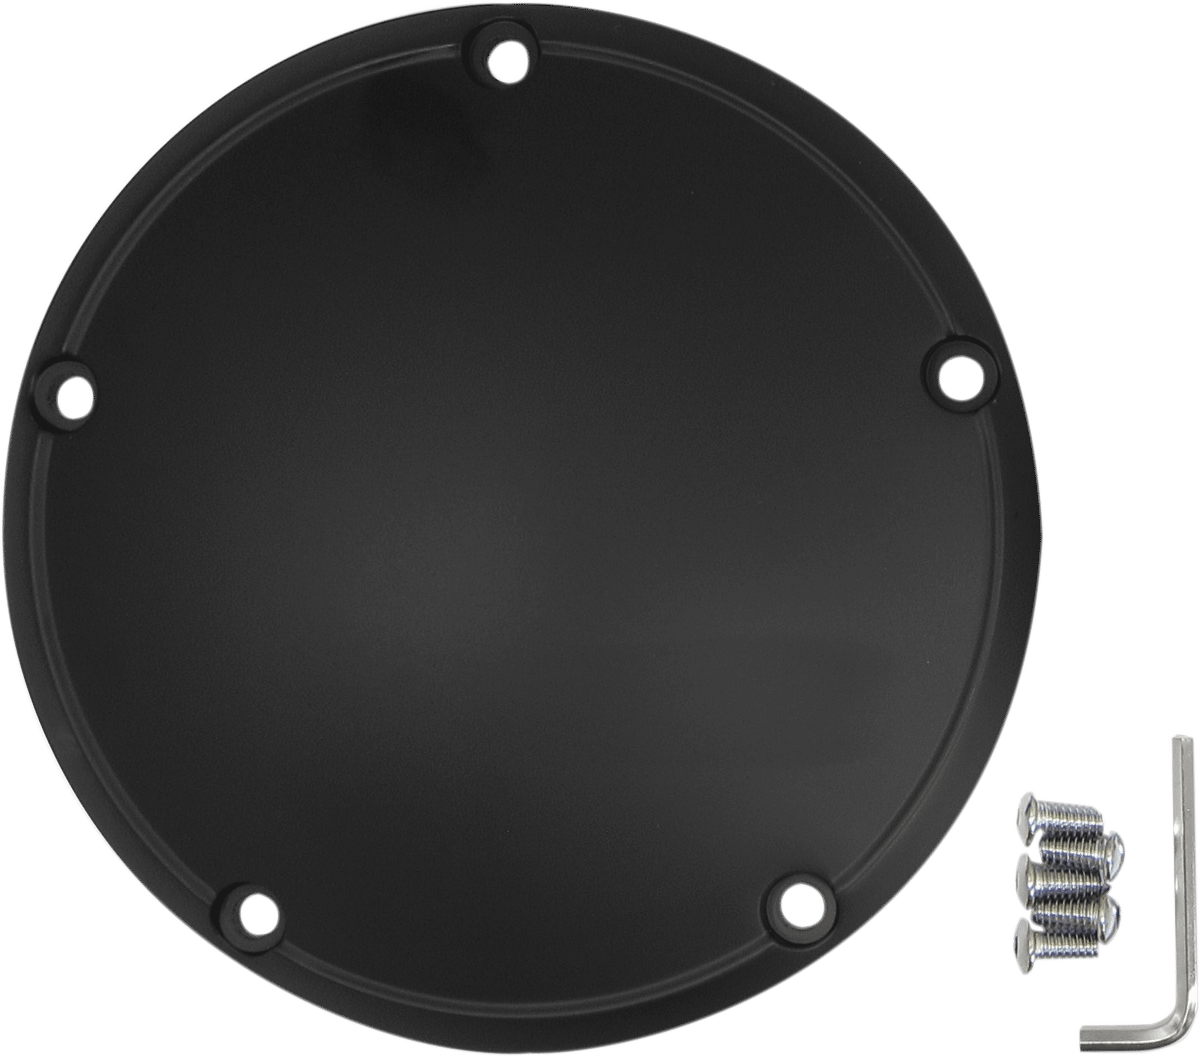 Satin Black Derby Cover for Harley Twin Cam Derby Cover 2000-2017